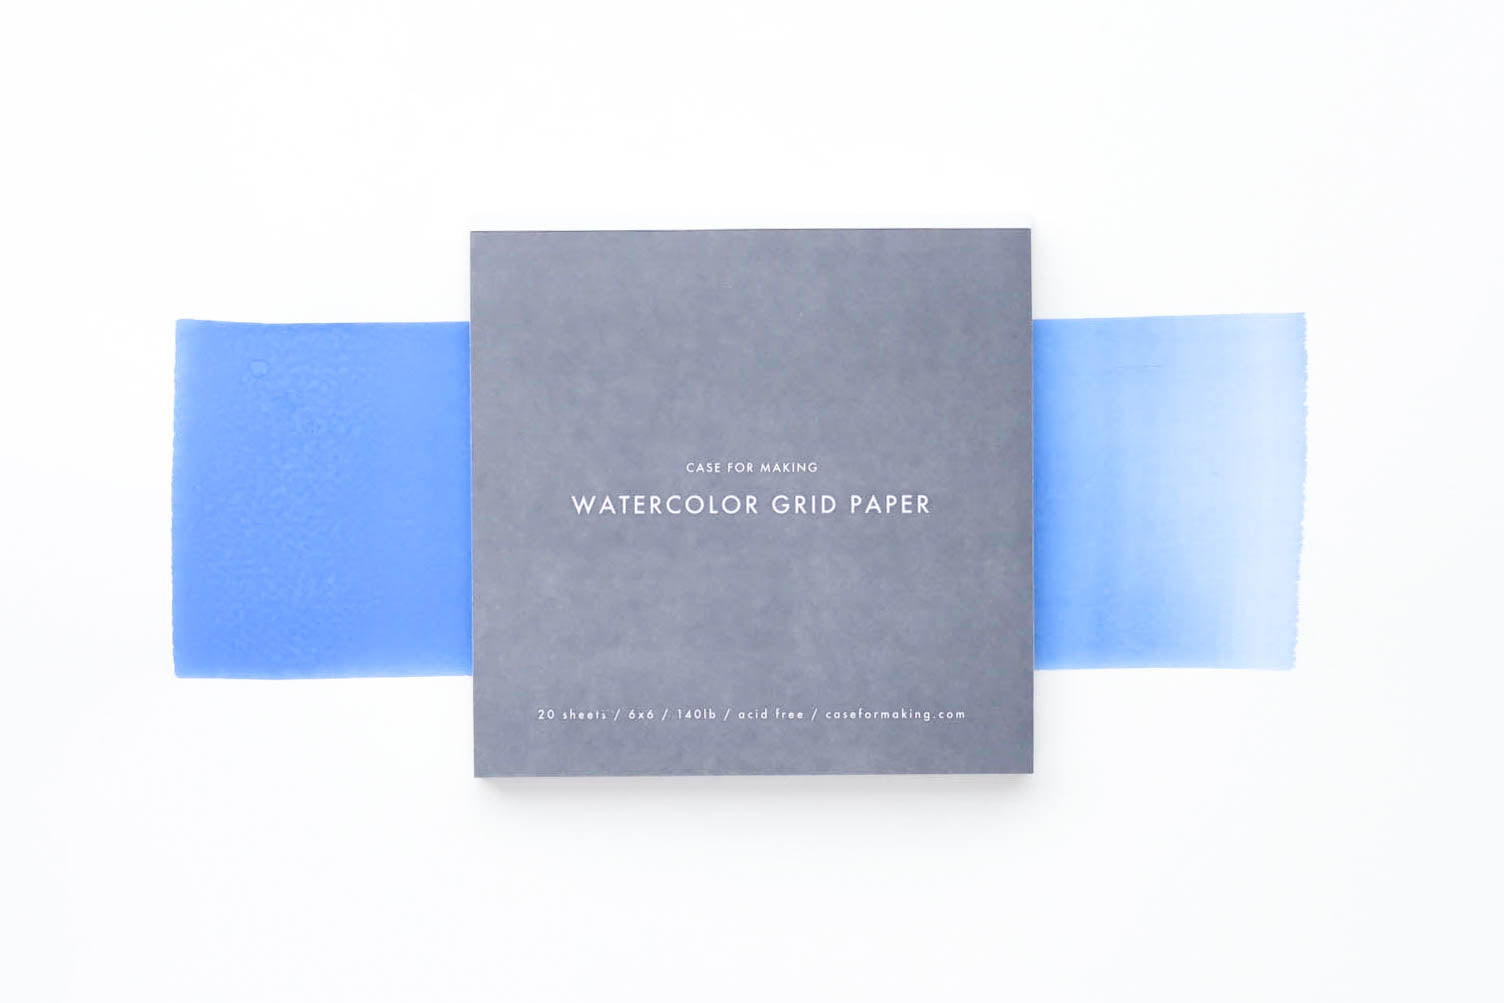 The closed, top-bound 6" x 6" Watercolor Grid Paper pad.  Showing the soft grey cover with white lettering. 